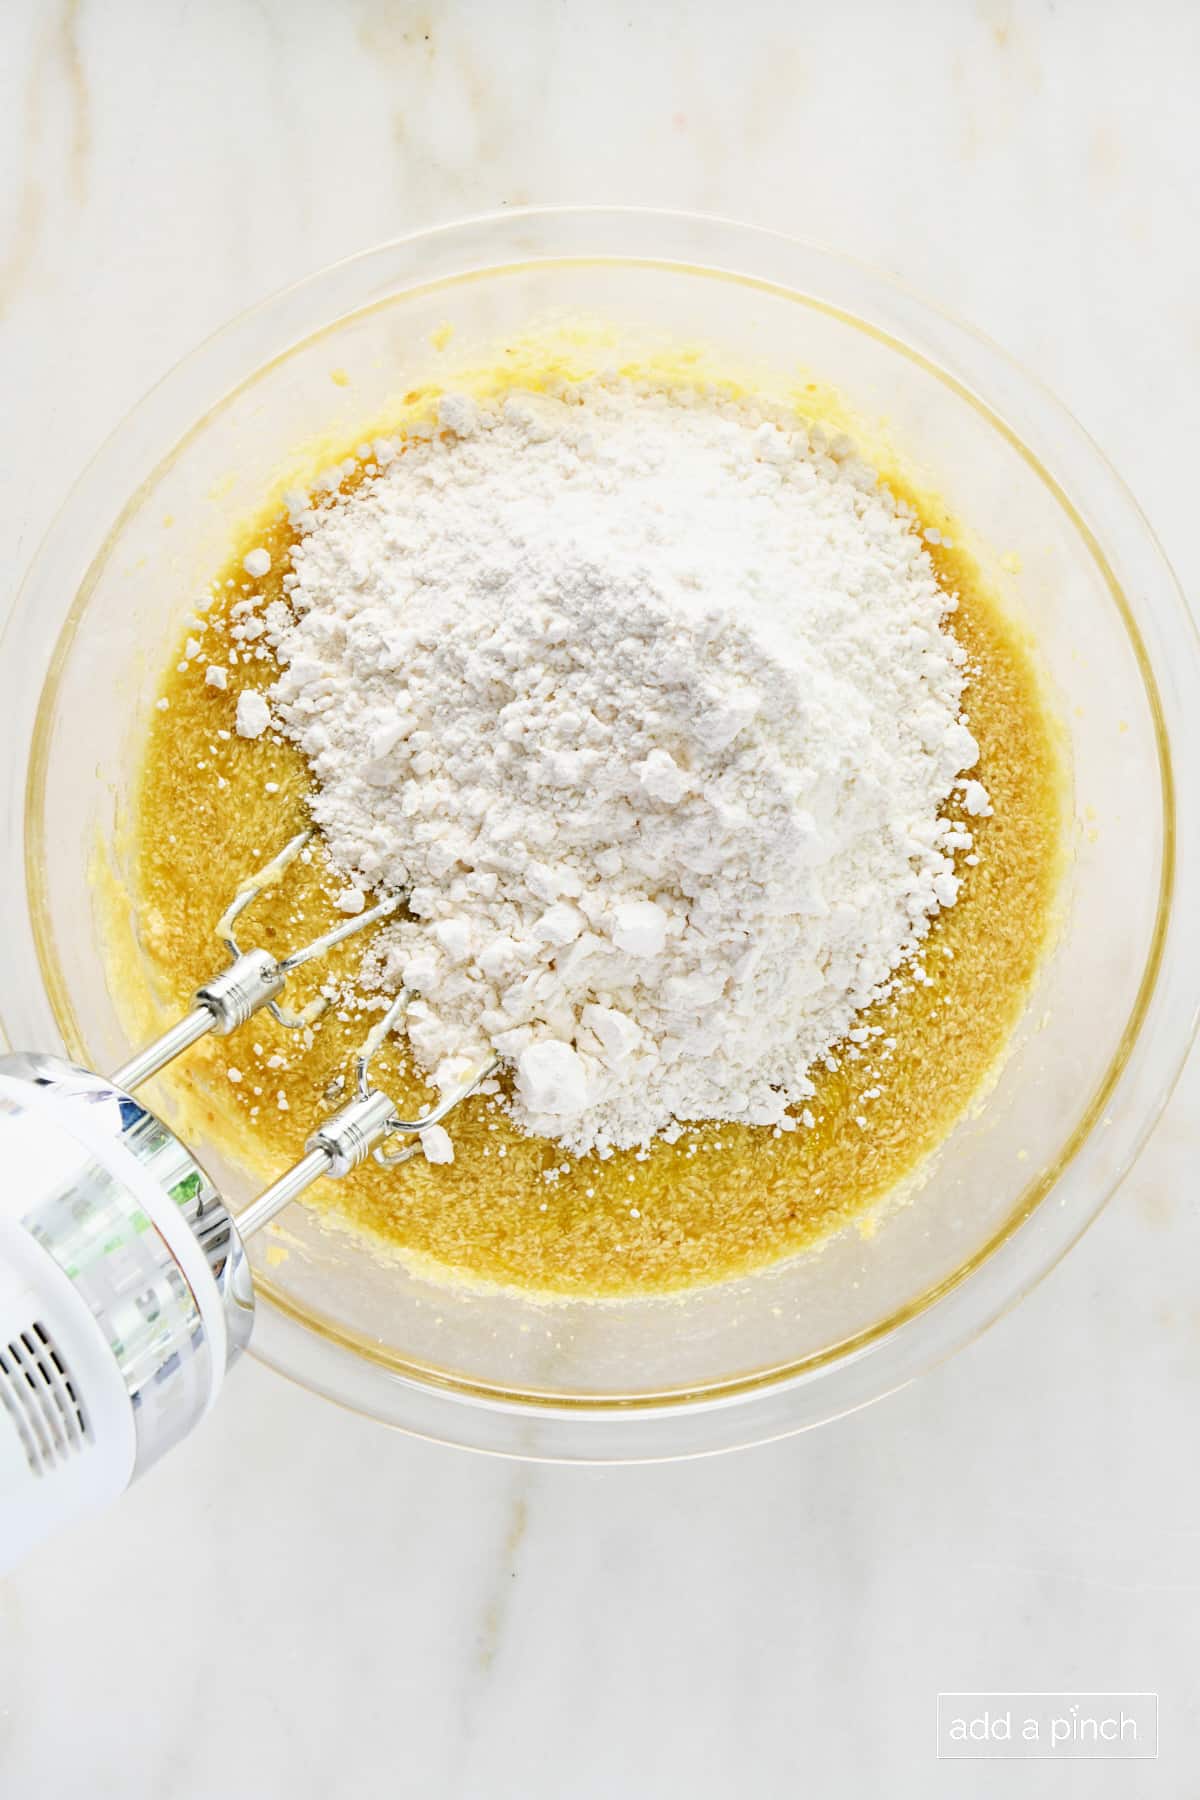 Flour added to batter in a glass bowl on a marble surface.